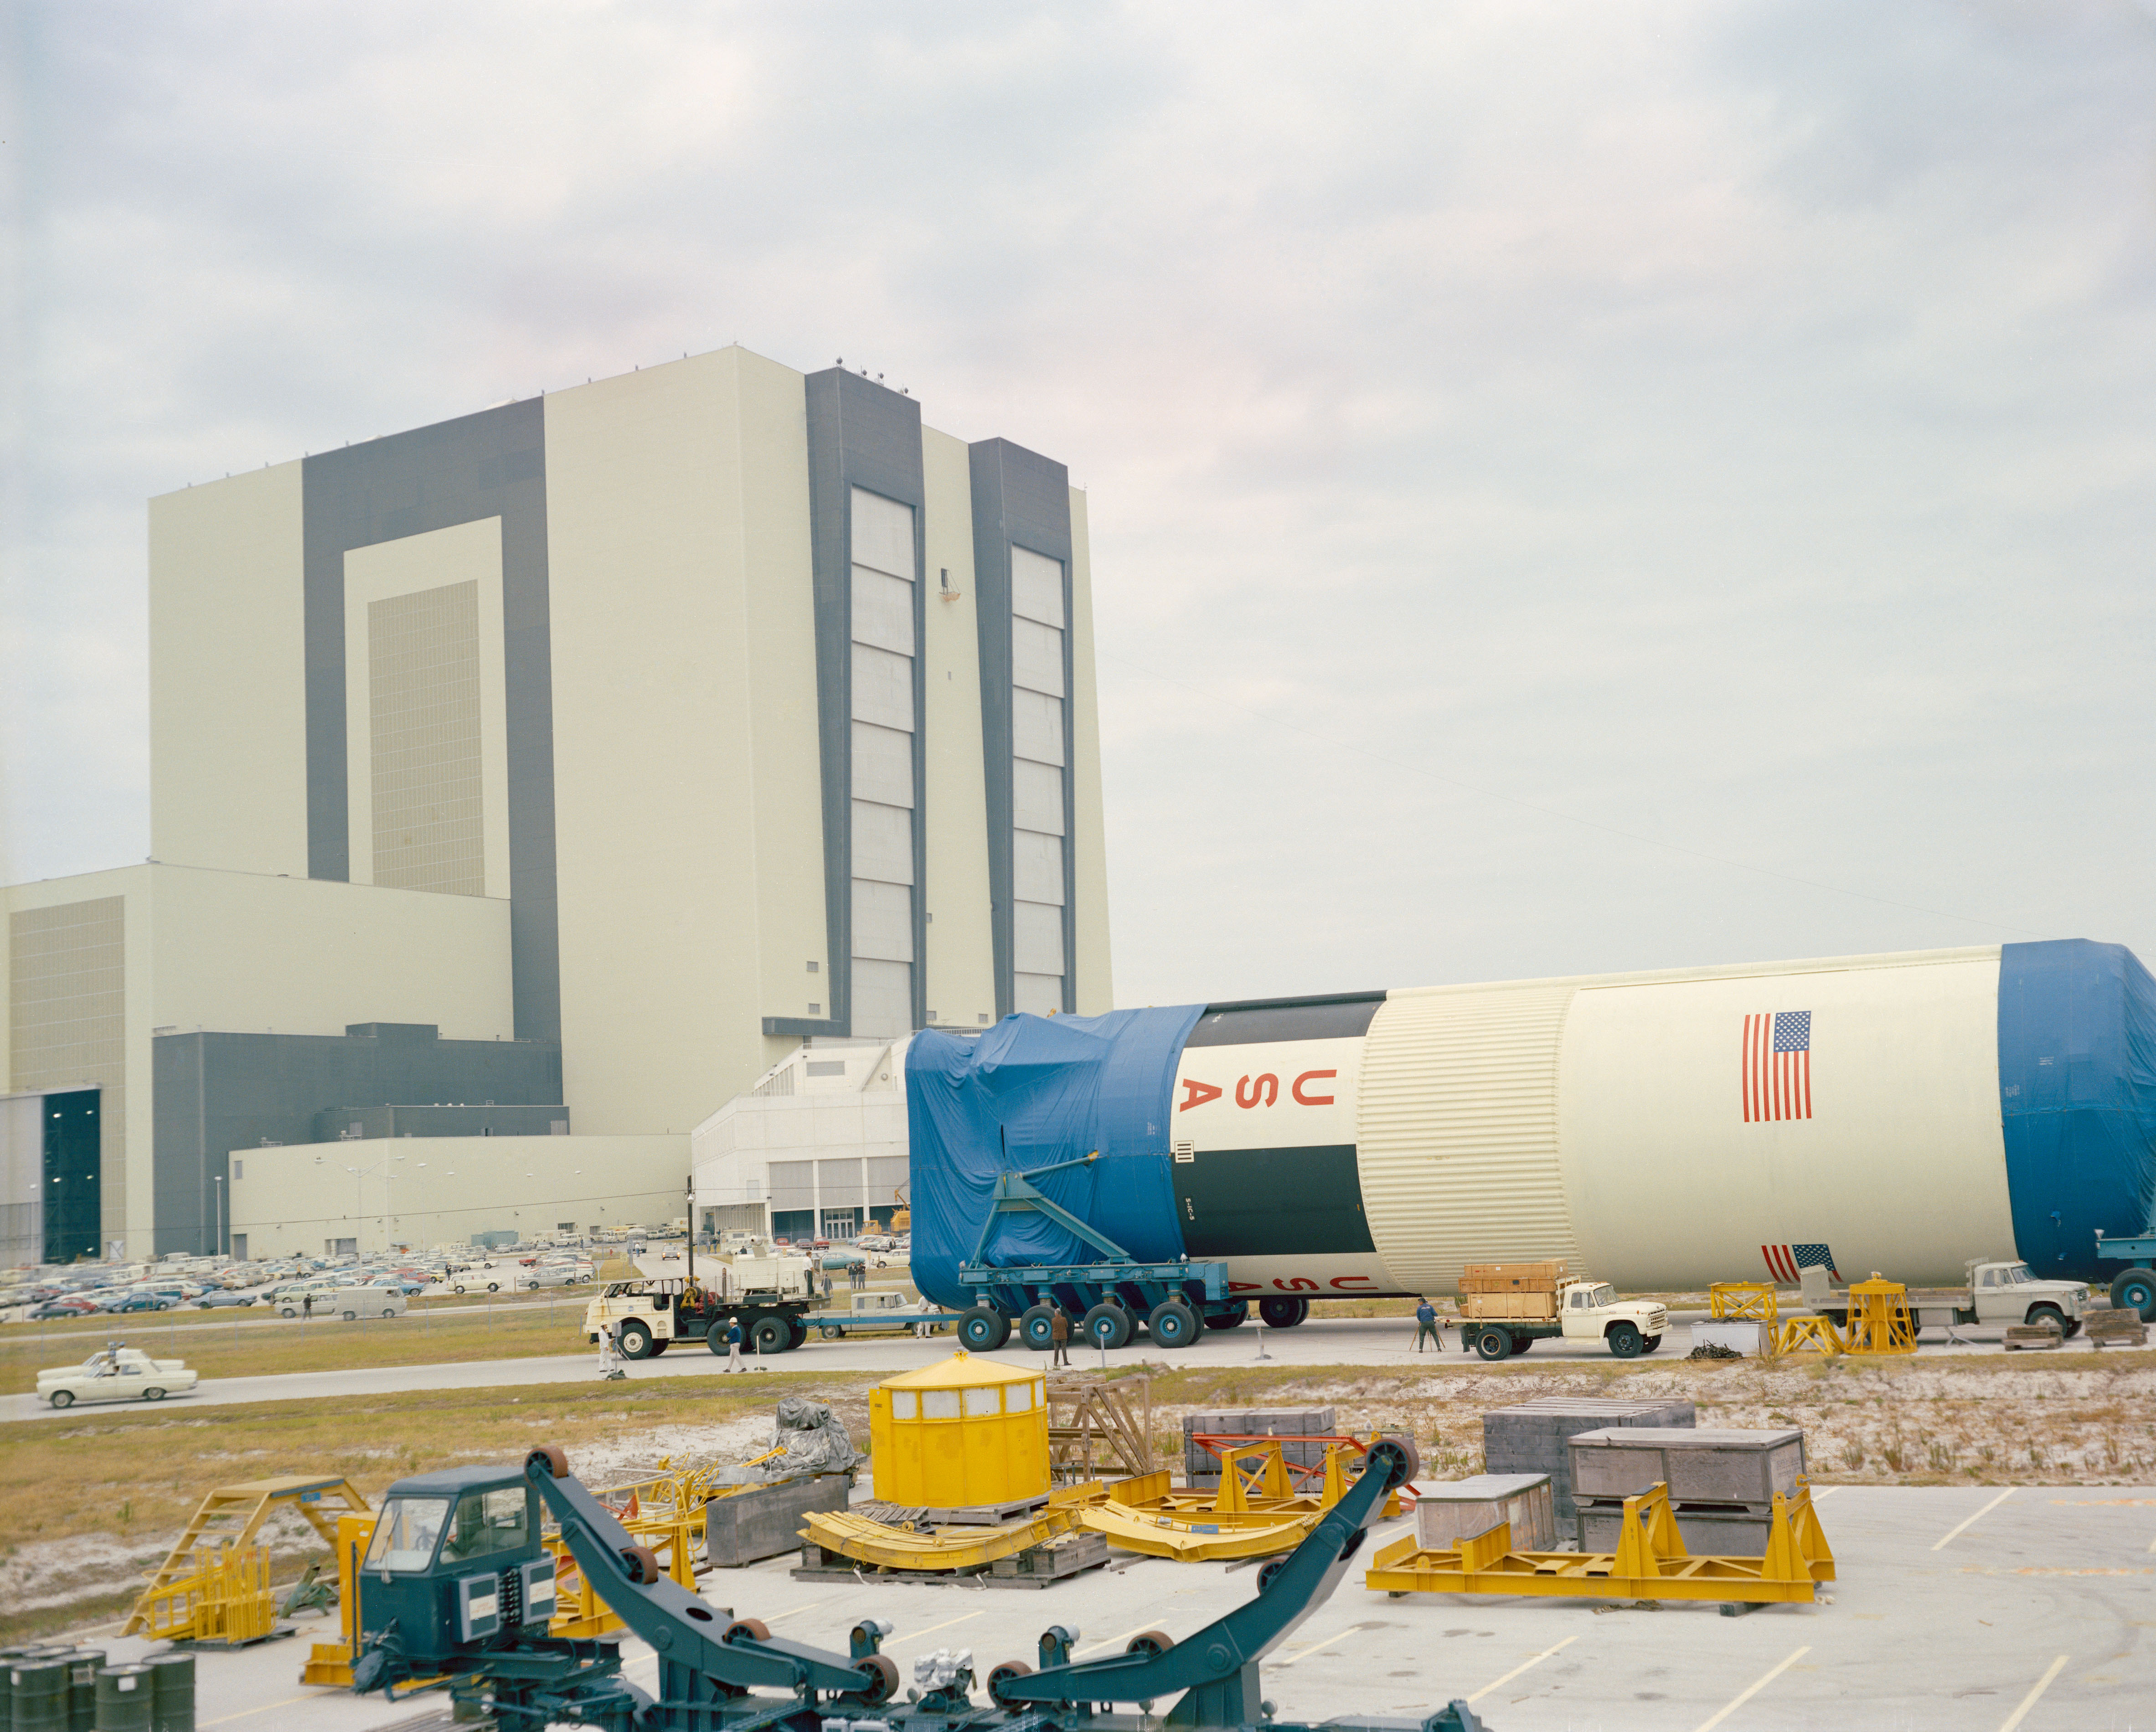 Photo of the Apollo 10 S-IC first stage arrives at KSC’s Vehicle Assembly Building (VAB).